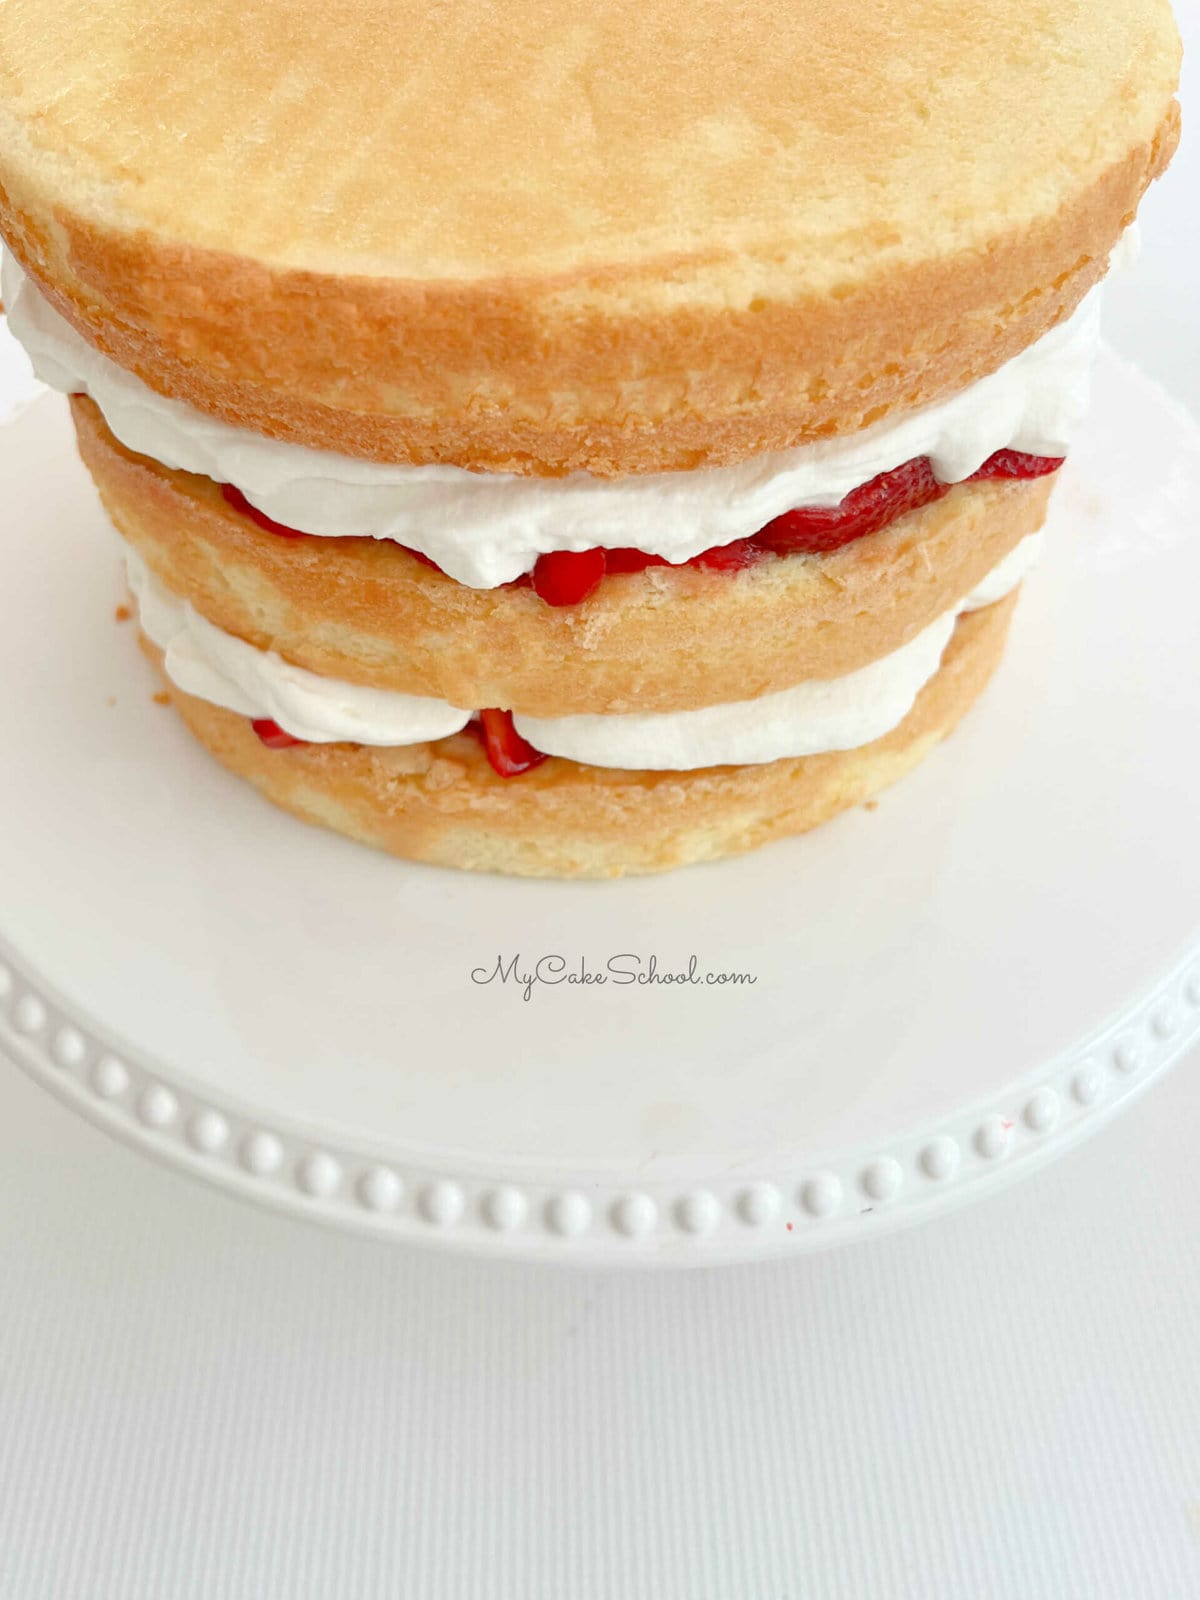 Layered Strawberry Shortcake with pound cake, berries, and whipped cream